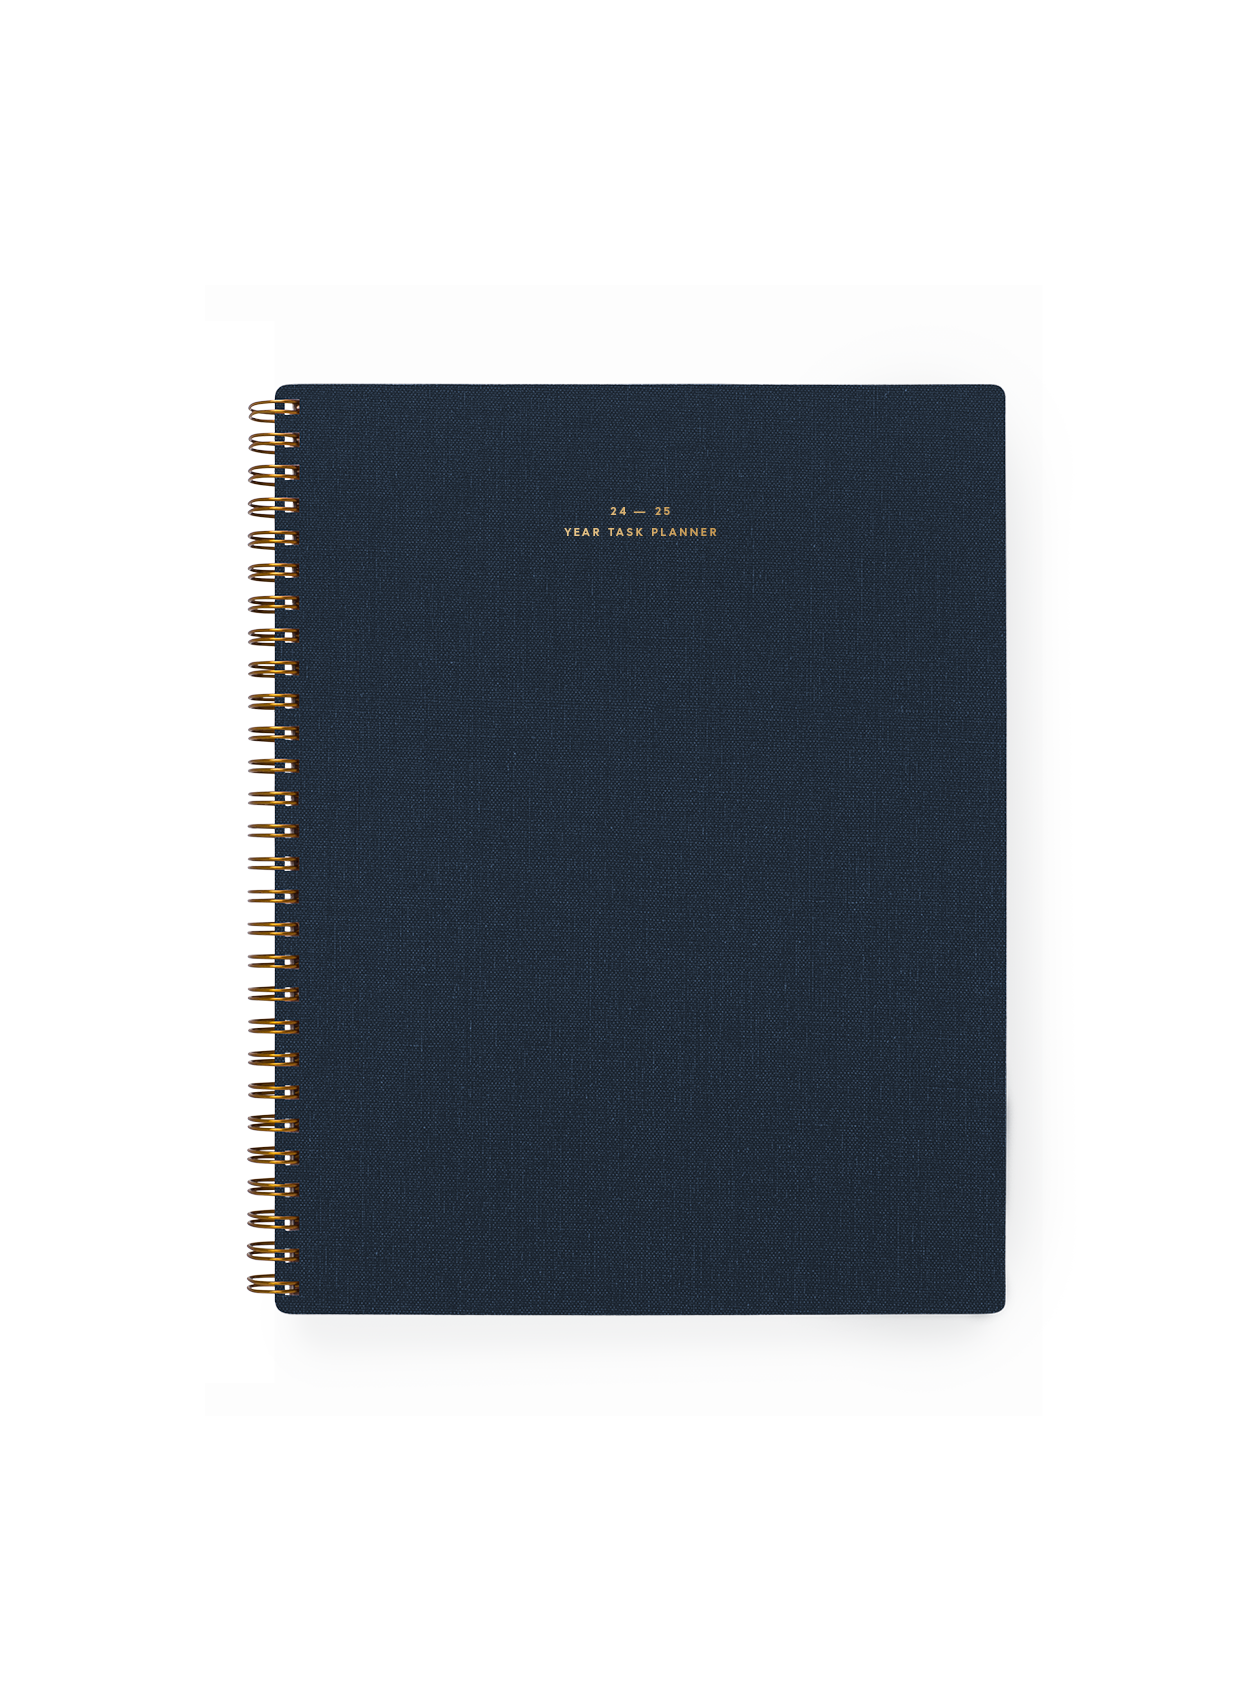 Appointed Year Task Planner with brass wire-o binding, foil stamped details, and durable water-resistant bookcloth || Oxford Blue